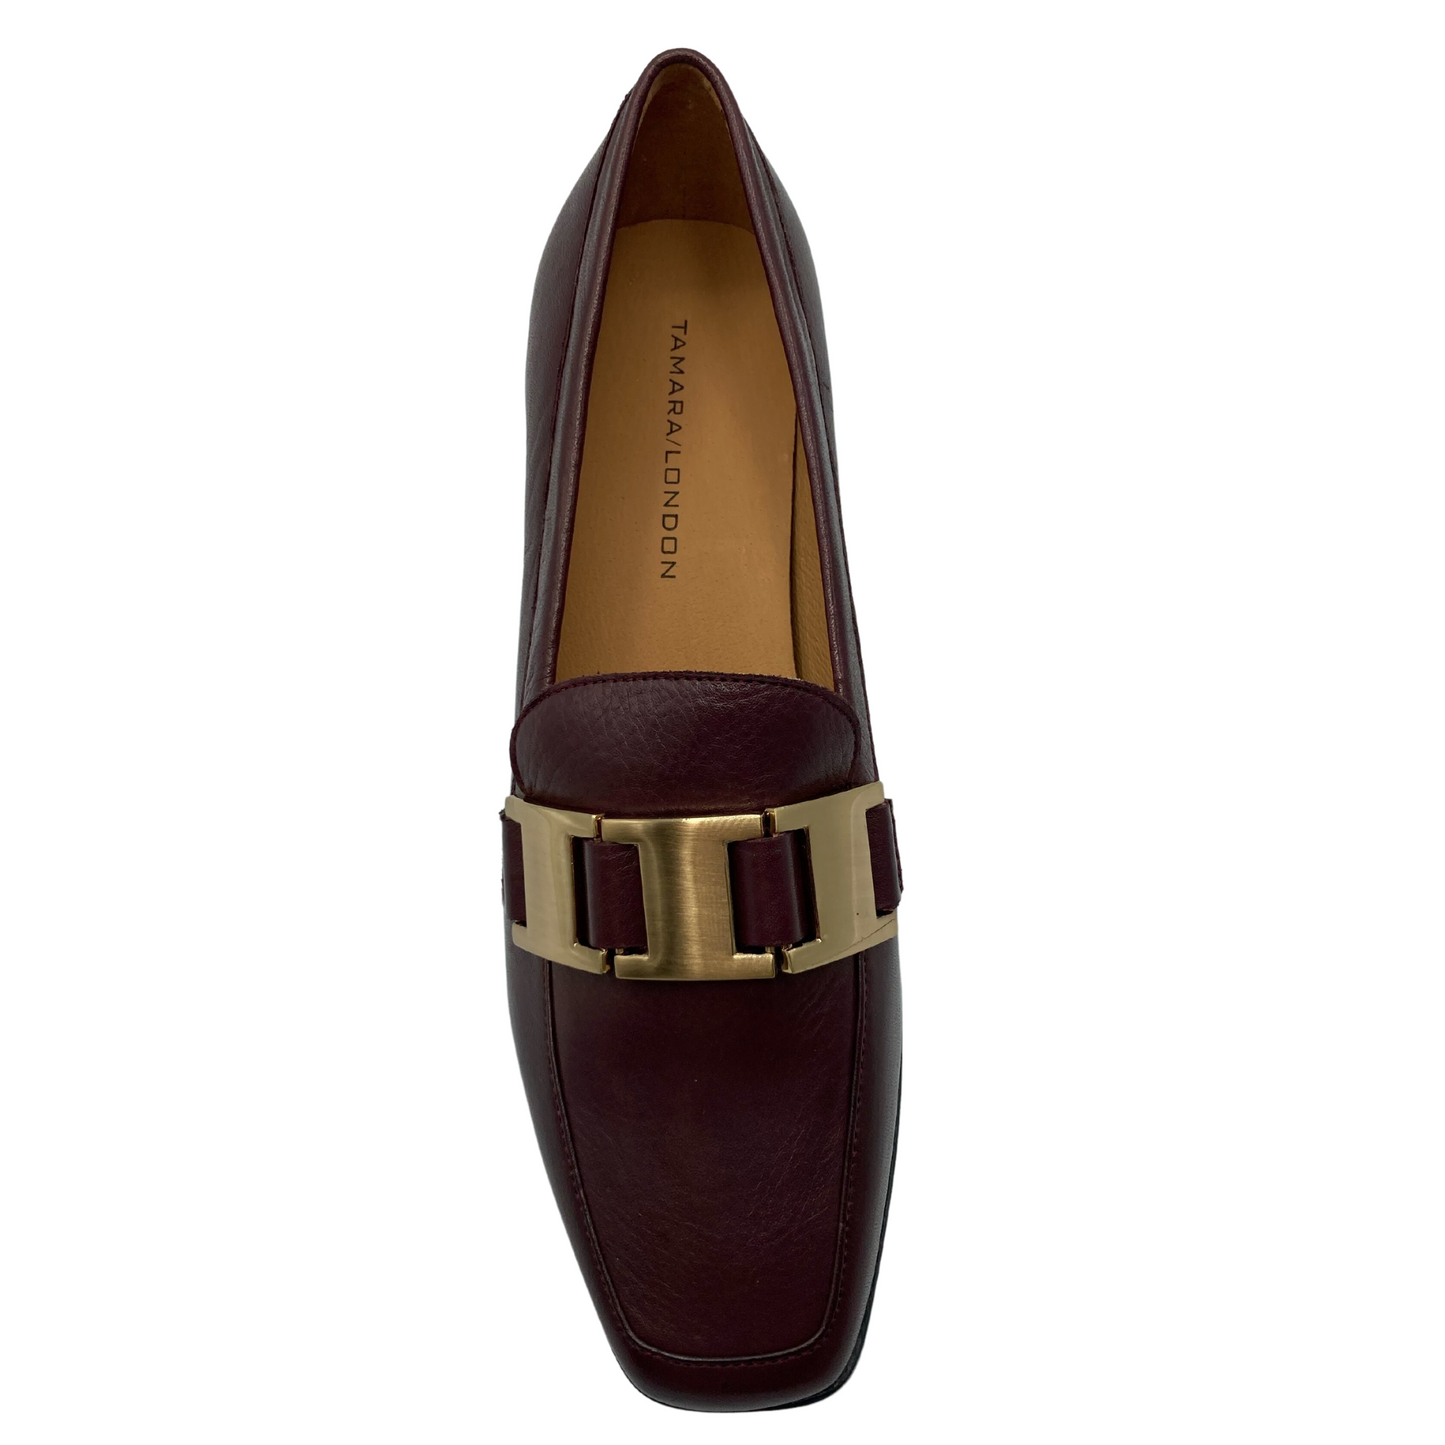 Top view of leather loafer with square toe and gold buckle detail on upper. 